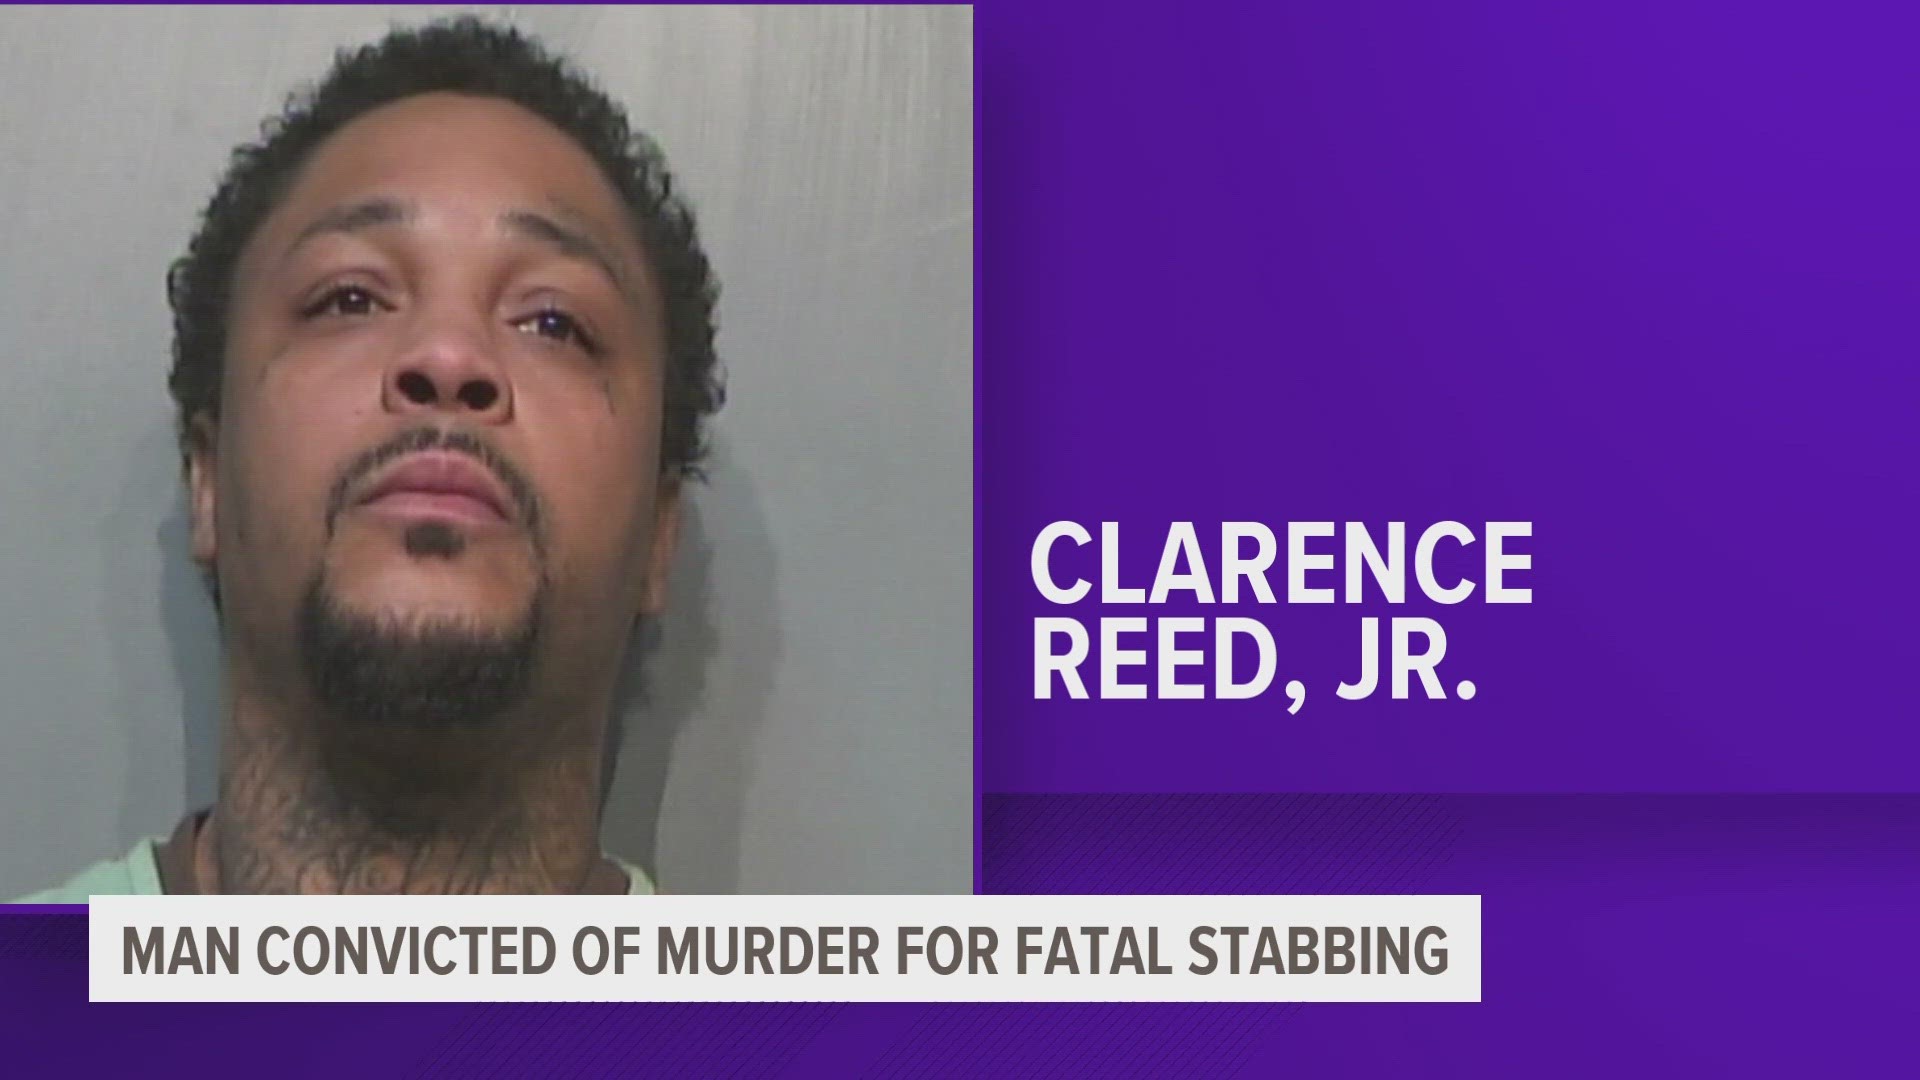 Edward Reed Jr. will face life in prison for the February 2022 murder of his girlfriend, 35-year-old Randi Light.